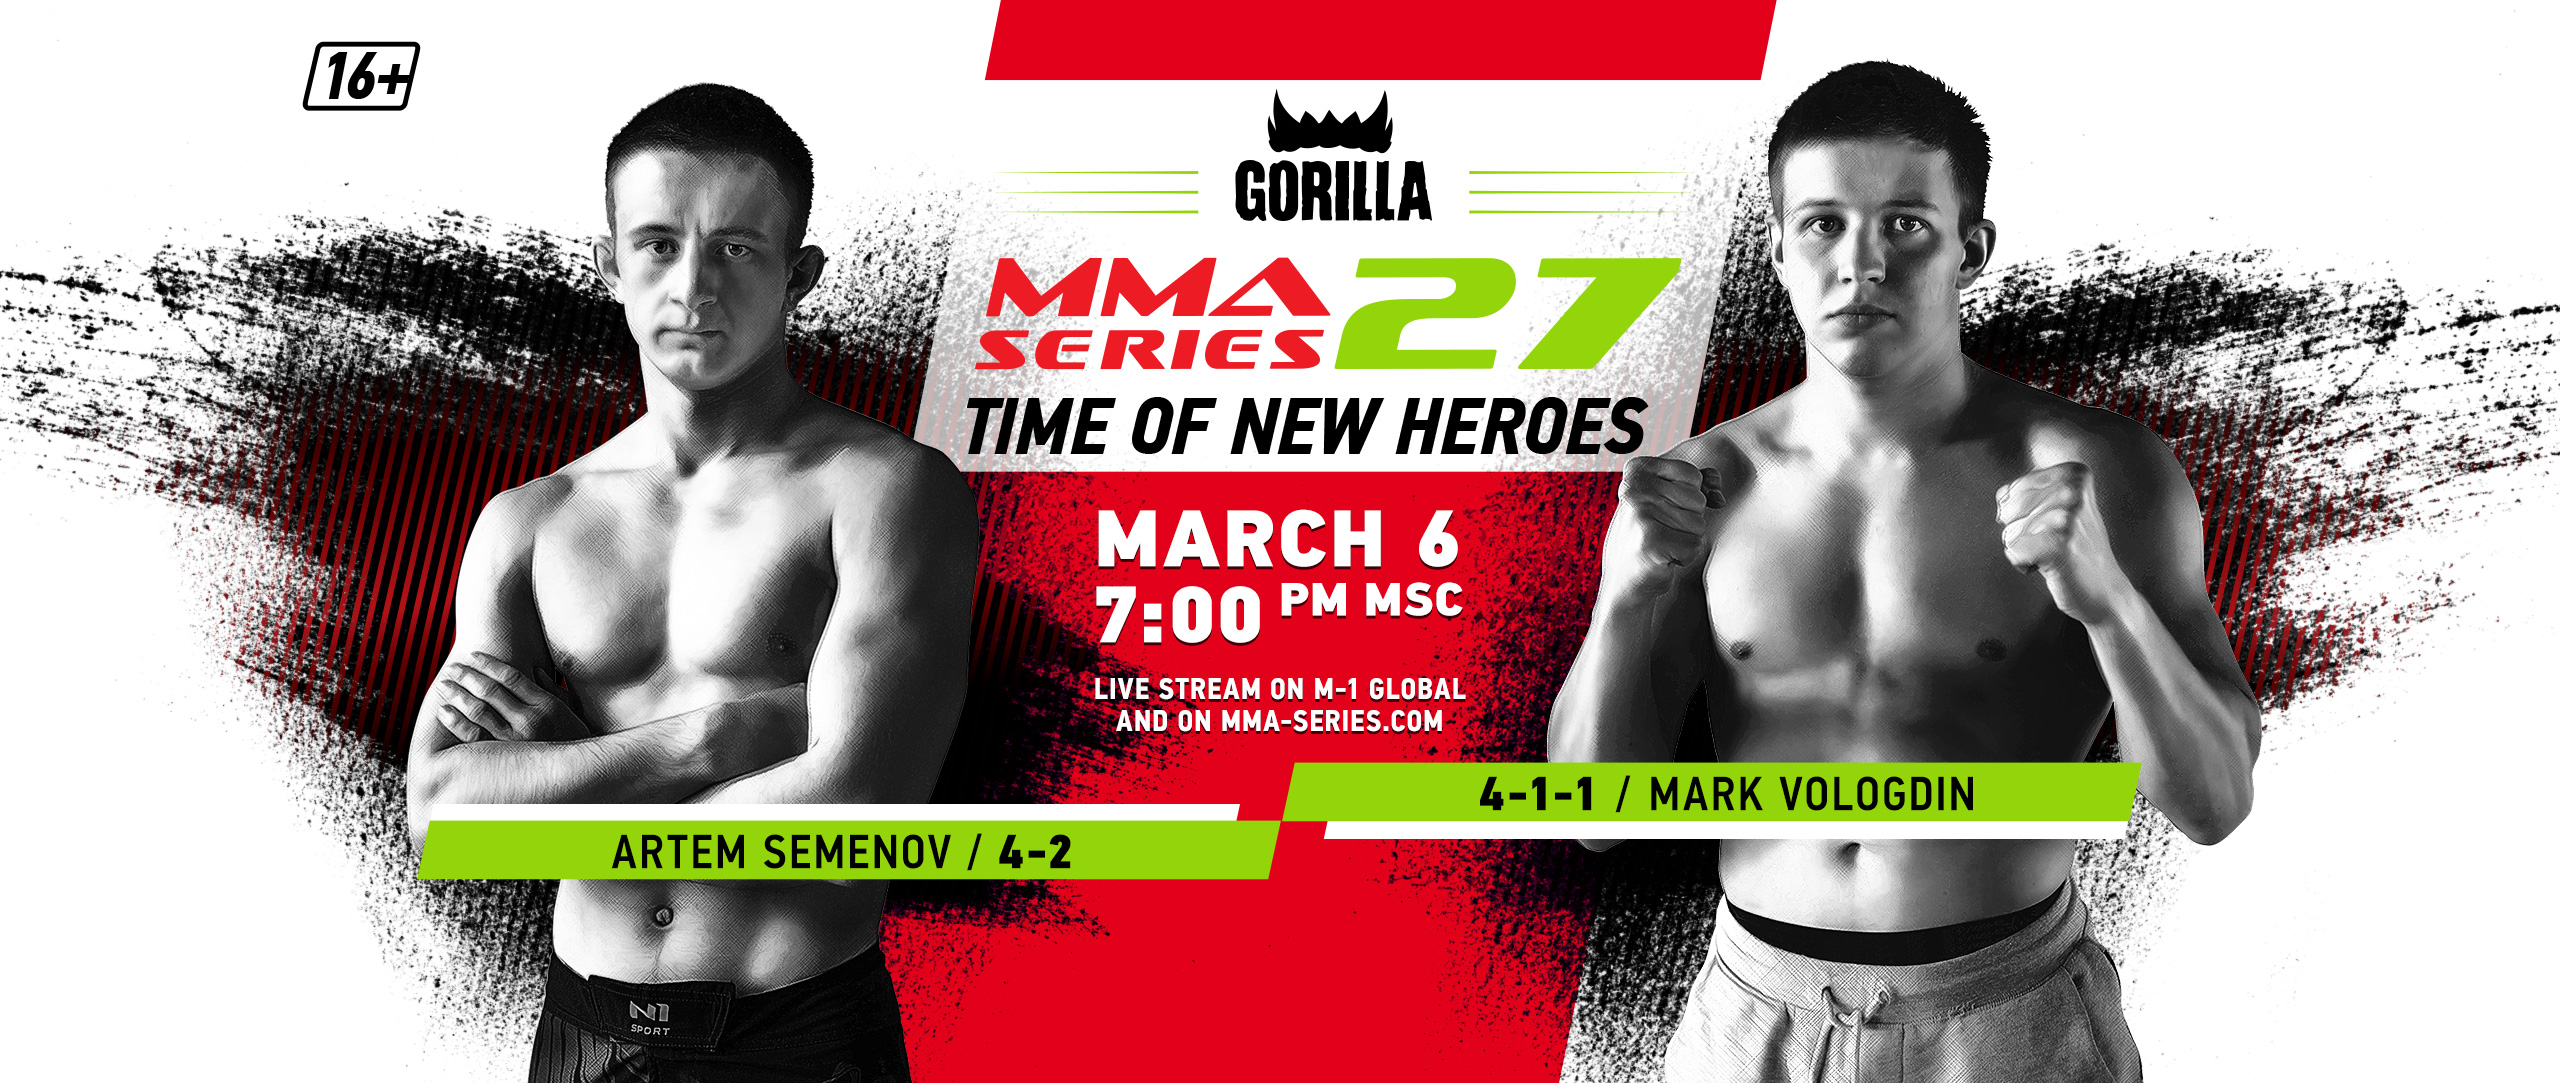 Gorilla MMA Series — 27 Time of new heroes MMA Series official website